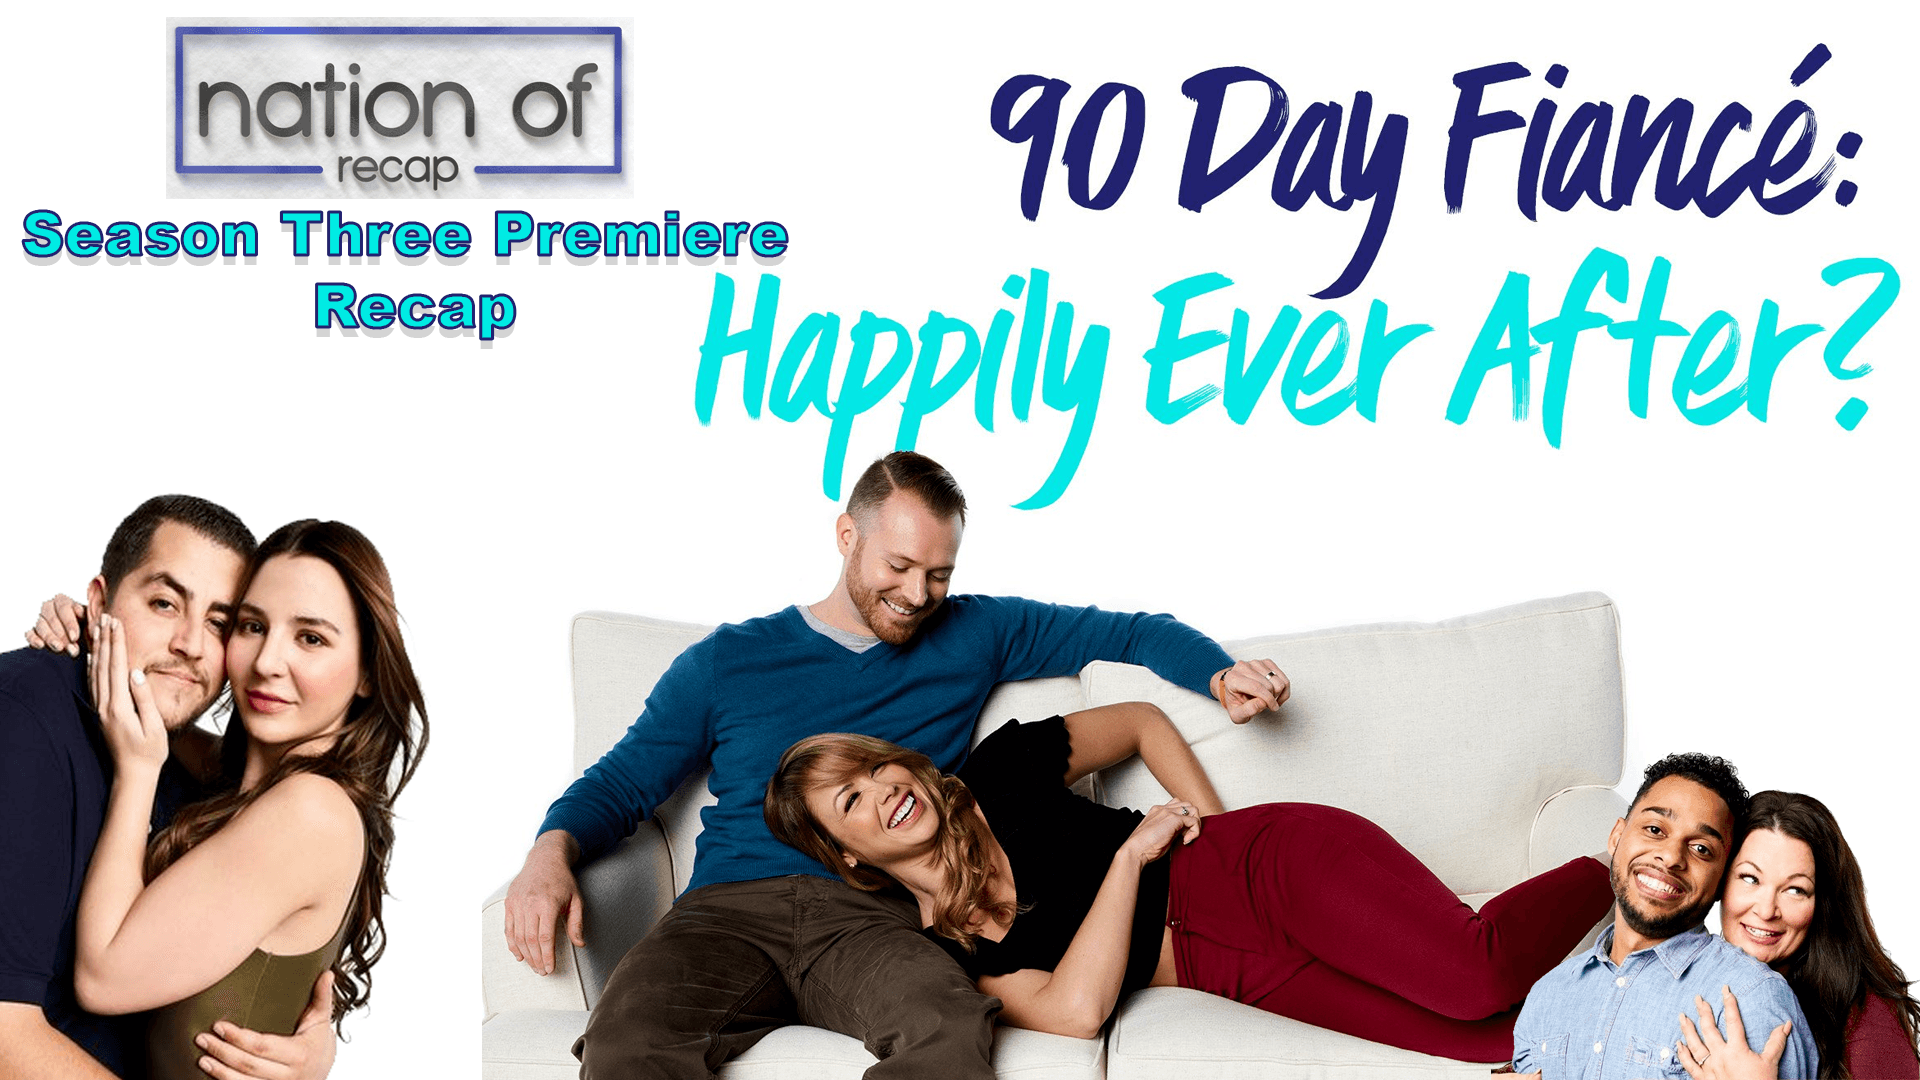 Season Three Premiere of 90 Day Fiance Happily Ever After